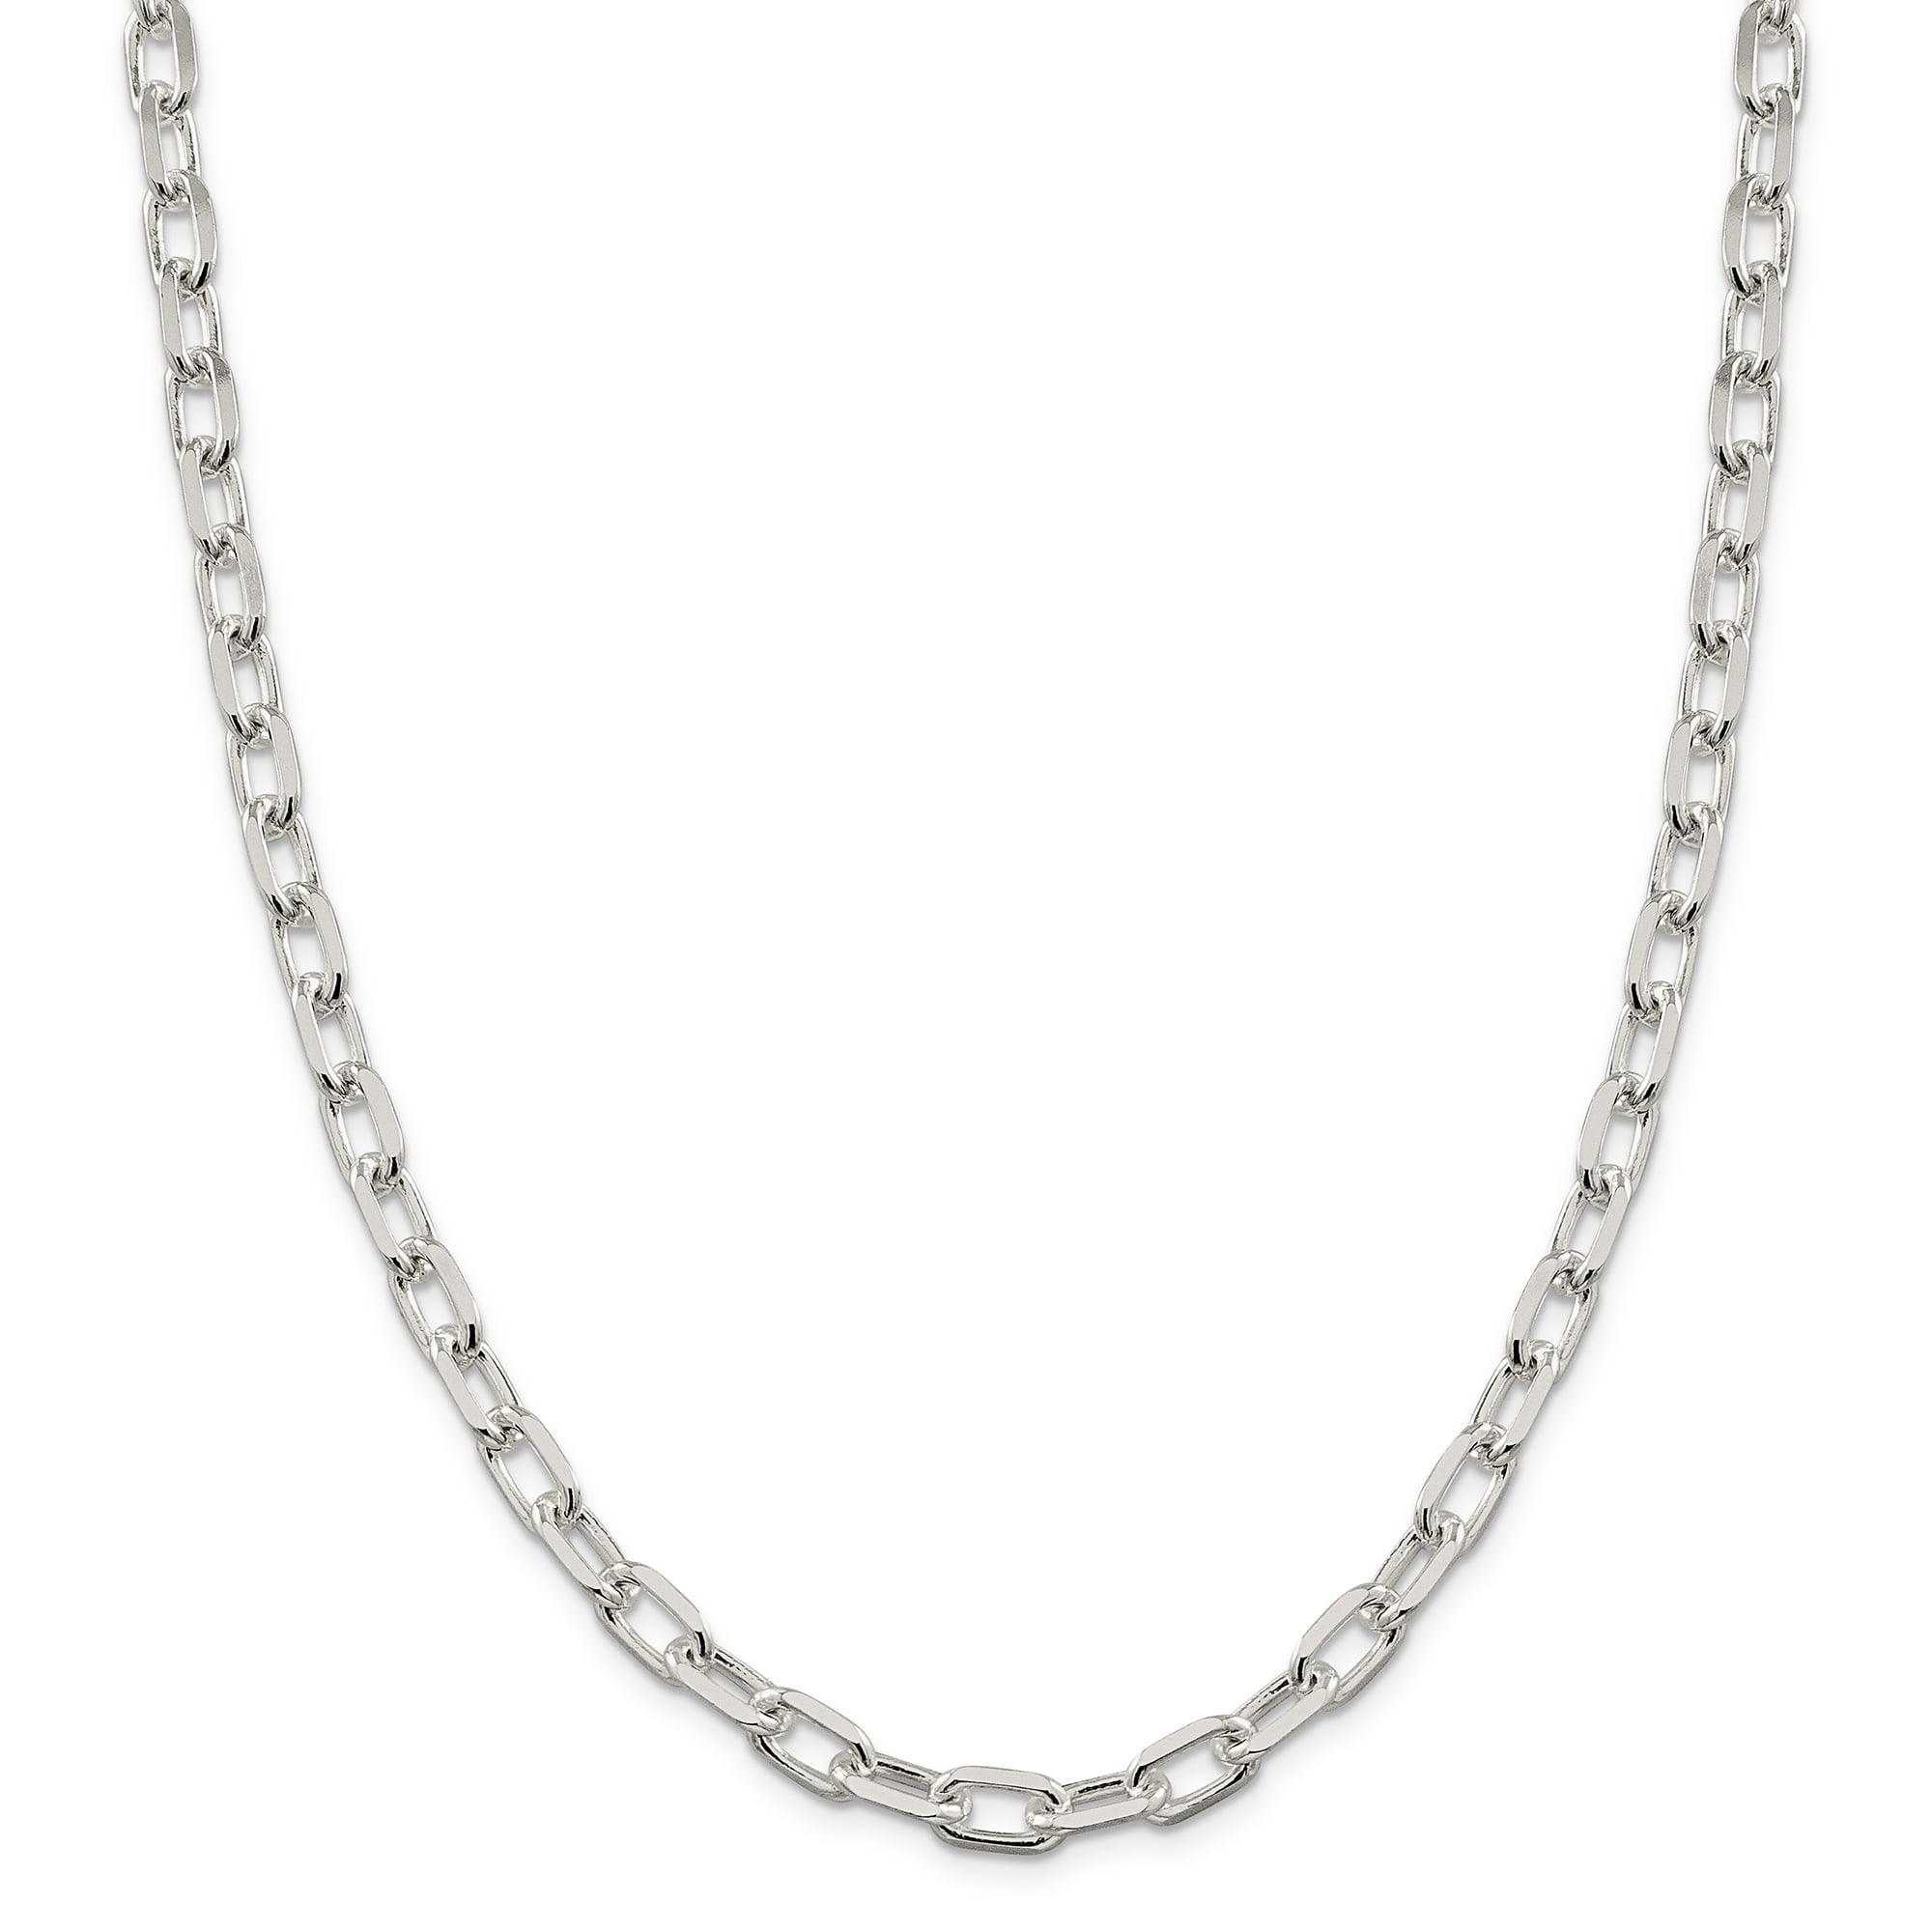 Primal Silver Sterling Silver 7.5mm Elongated Open Link Chain - Walmart.com